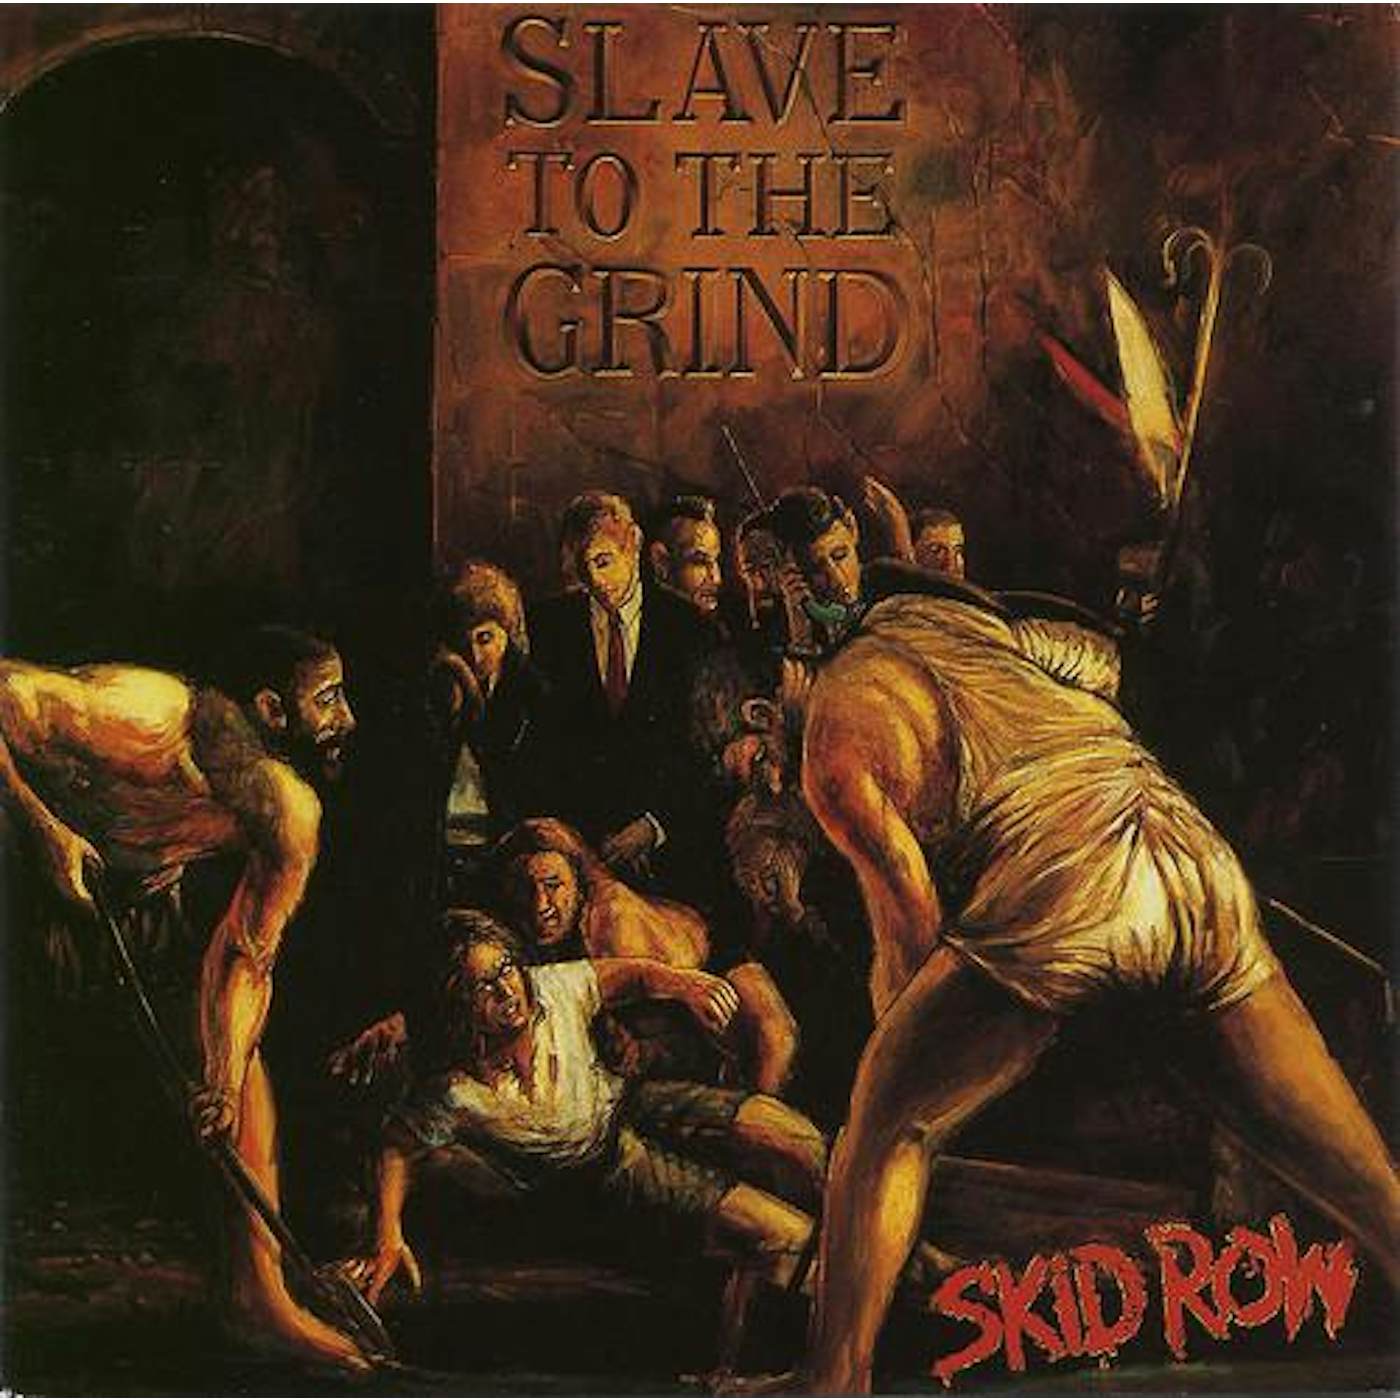 Skid Row SLAVE TO THE GRIND CD